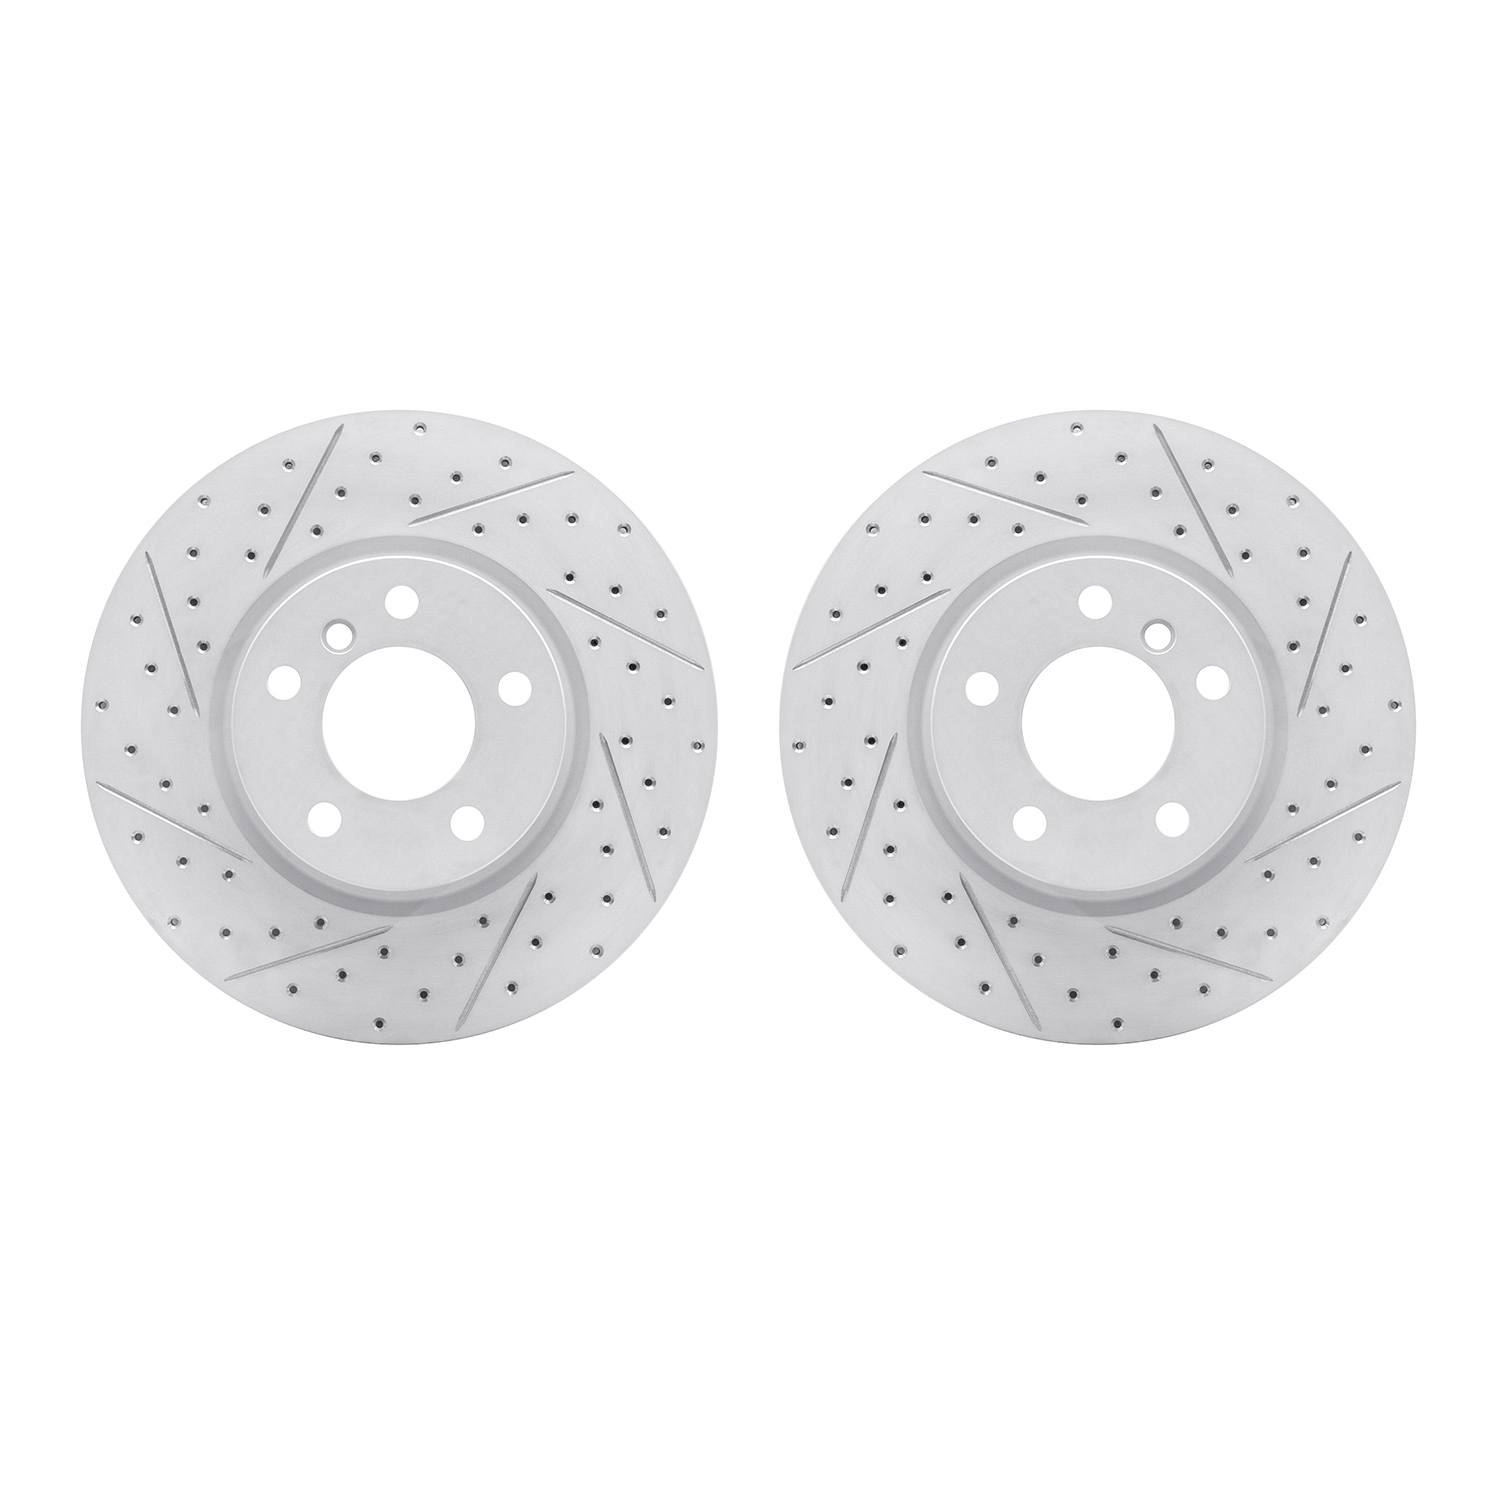 2002-31041 Geoperformance Drilled/Slotted Brake Rotors, 2011-2018 BMW, Position: Front